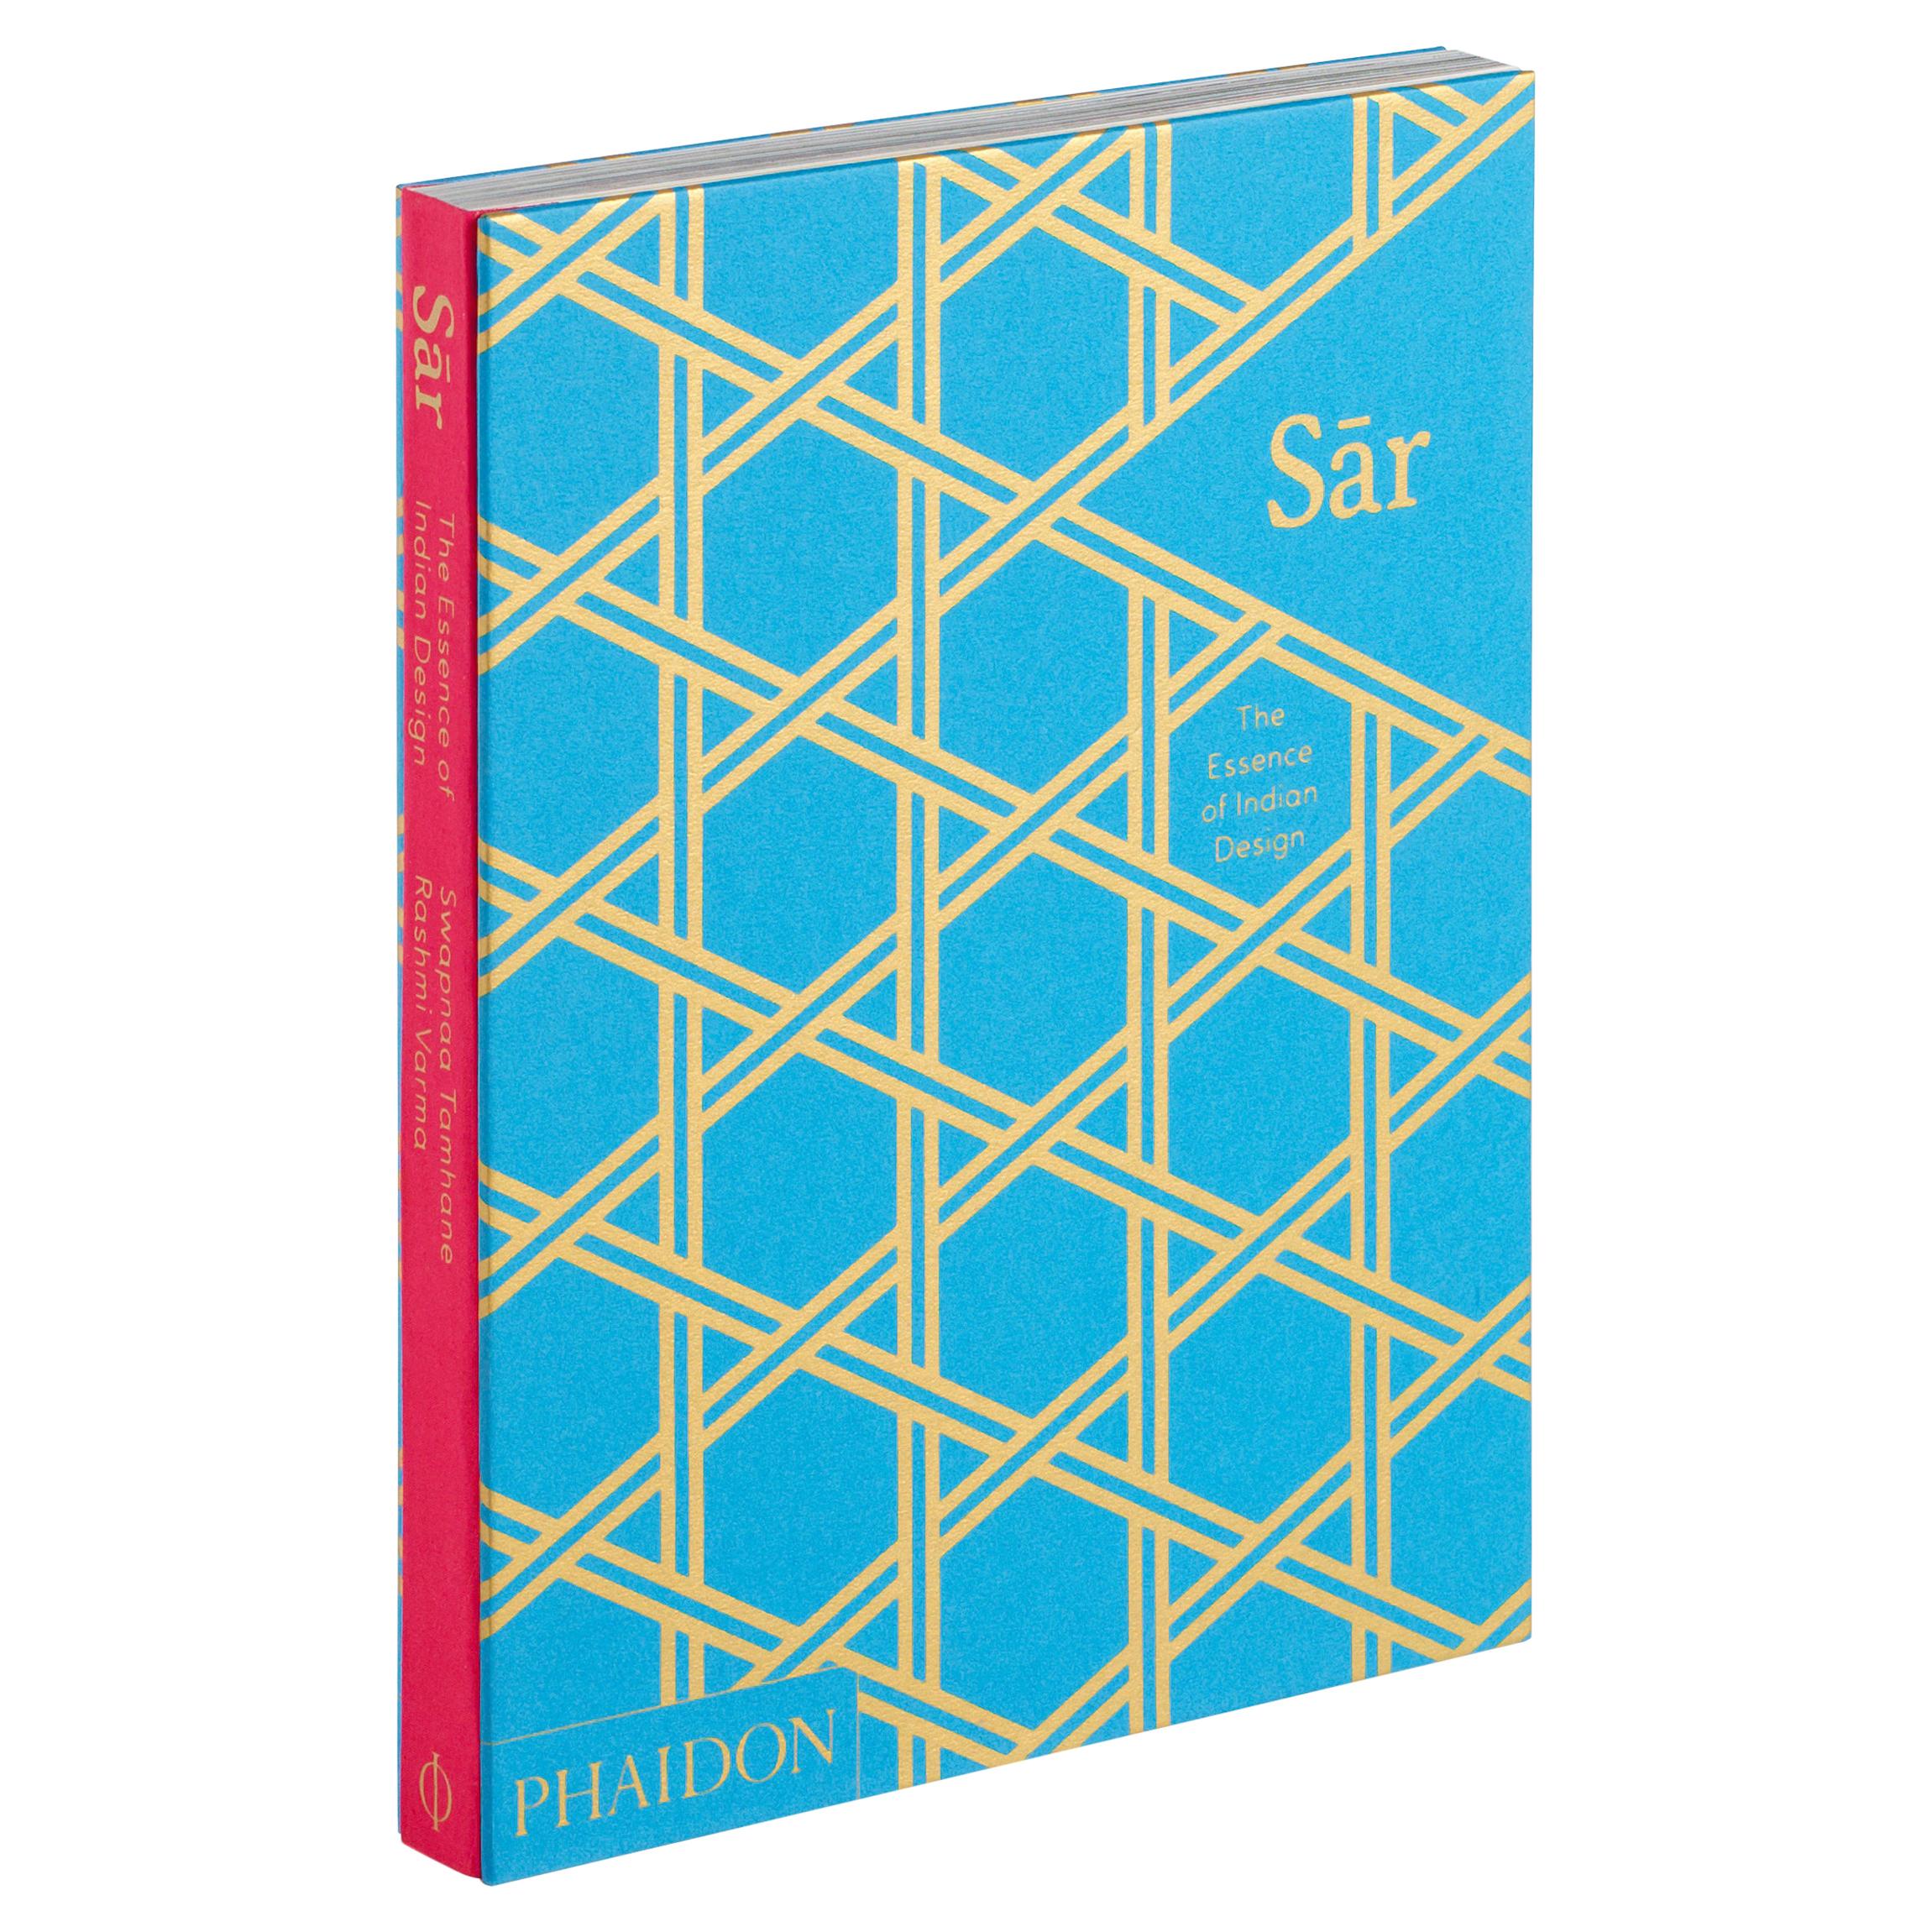 "Sar The Essence of Indian Design" Book For Sale